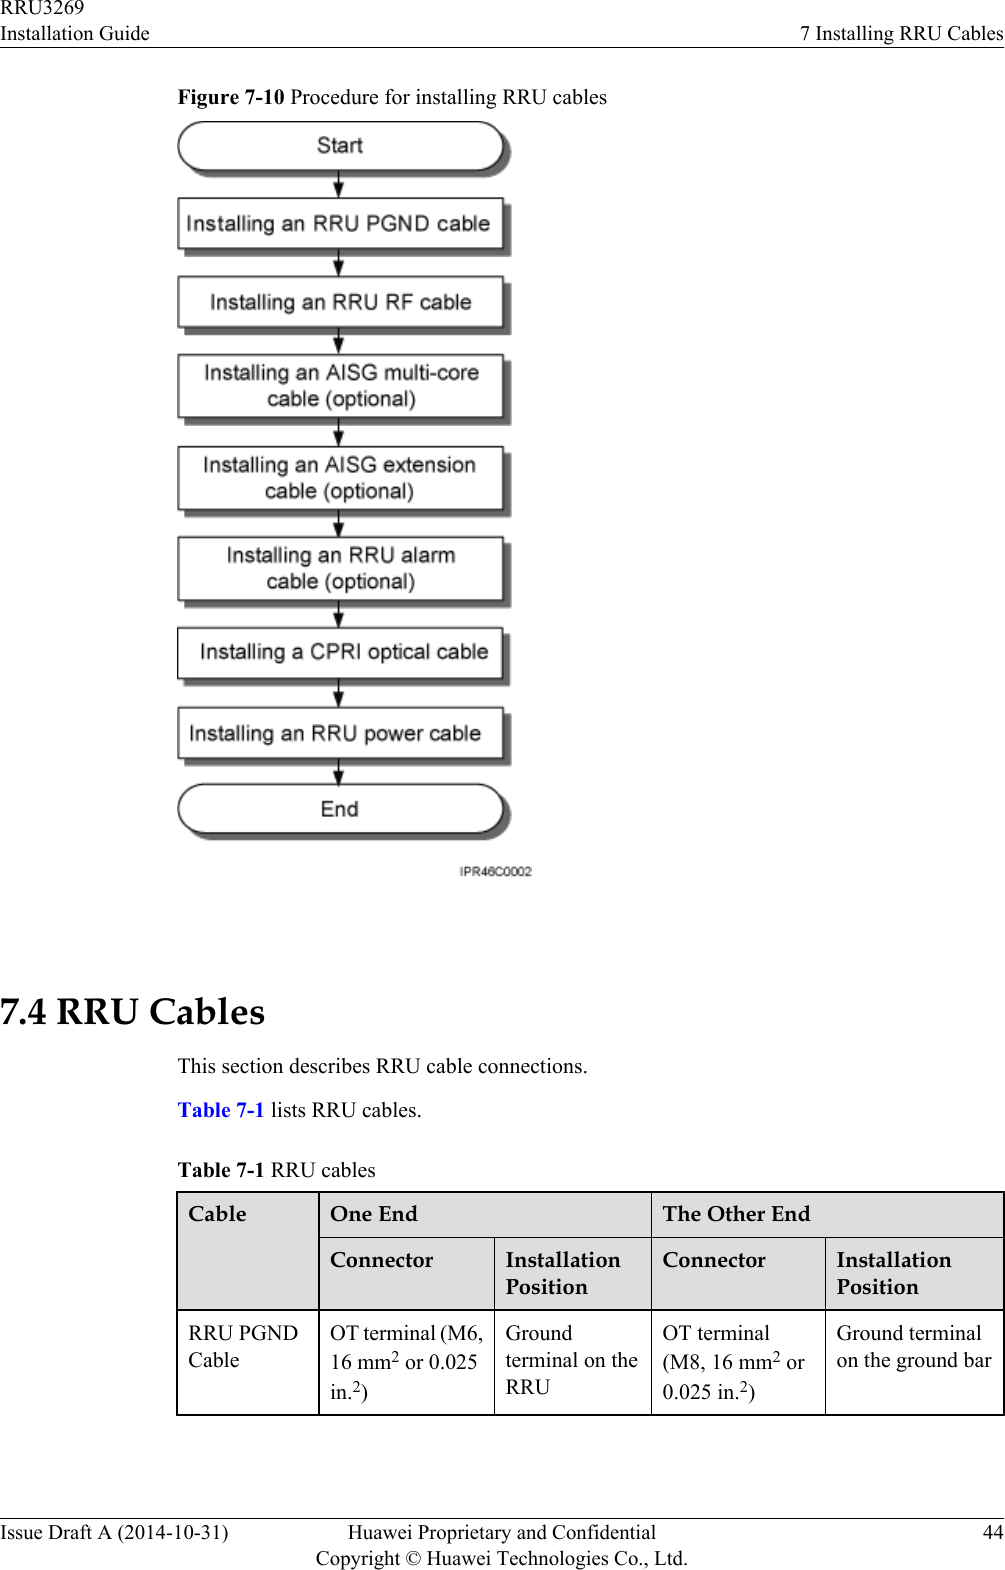 Figure 7-10 Procedure for installing RRU cables 7.4 RRU CablesThis section describes RRU cable connections.Table 7-1 lists RRU cables.Table 7-1 RRU cablesCable One End The Other EndConnector InstallationPositionConnector InstallationPositionRRU PGNDCableOT terminal (M6,16 mm2 or 0.025in.2)Groundterminal on theRRUOT terminal(M8, 16 mm2 or0.025 in.2)Ground terminalon the ground barRRU3269Installation Guide 7 Installing RRU CablesIssue Draft A (2014-10-31) Huawei Proprietary and ConfidentialCopyright © Huawei Technologies Co., Ltd.44